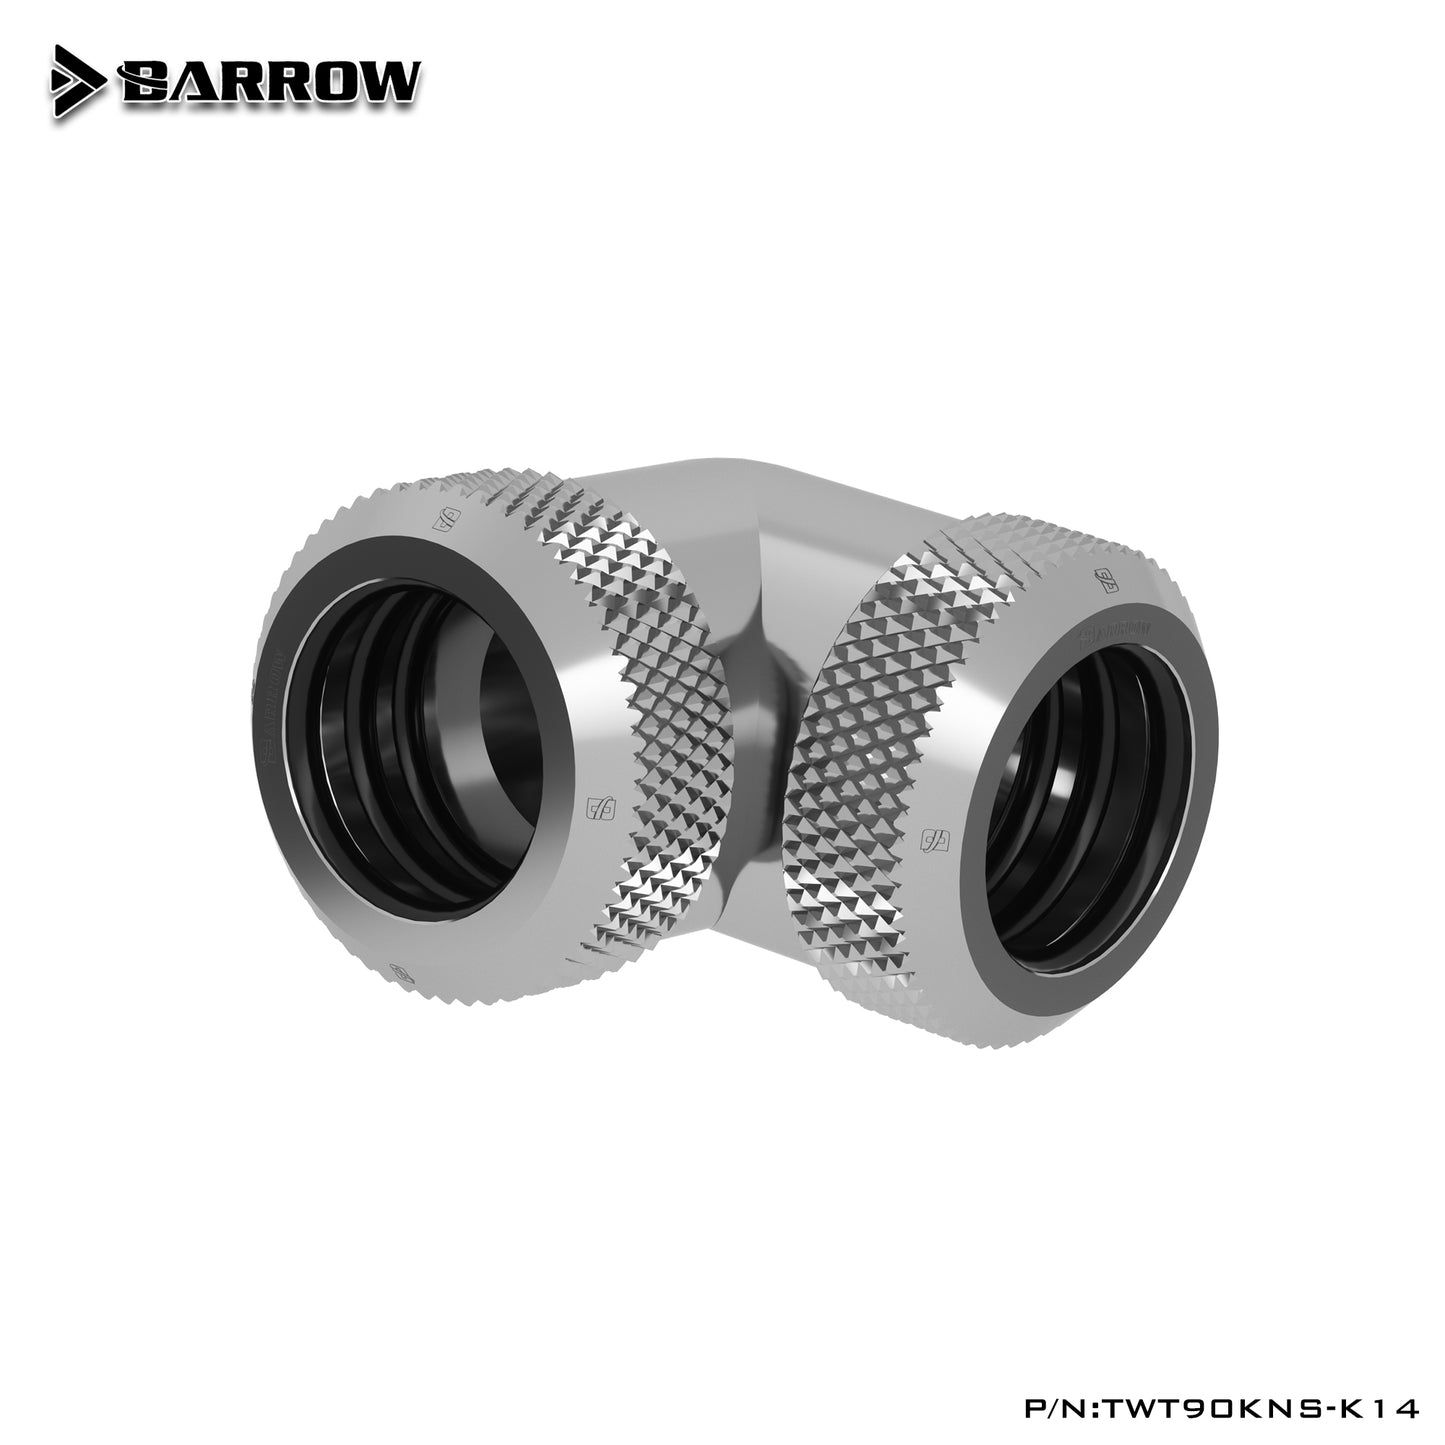 Barrow 90 Degree Hard Tube Fittings, G1/4 Adapters For 14mm Hard Tubes, TWT90KNS-K14